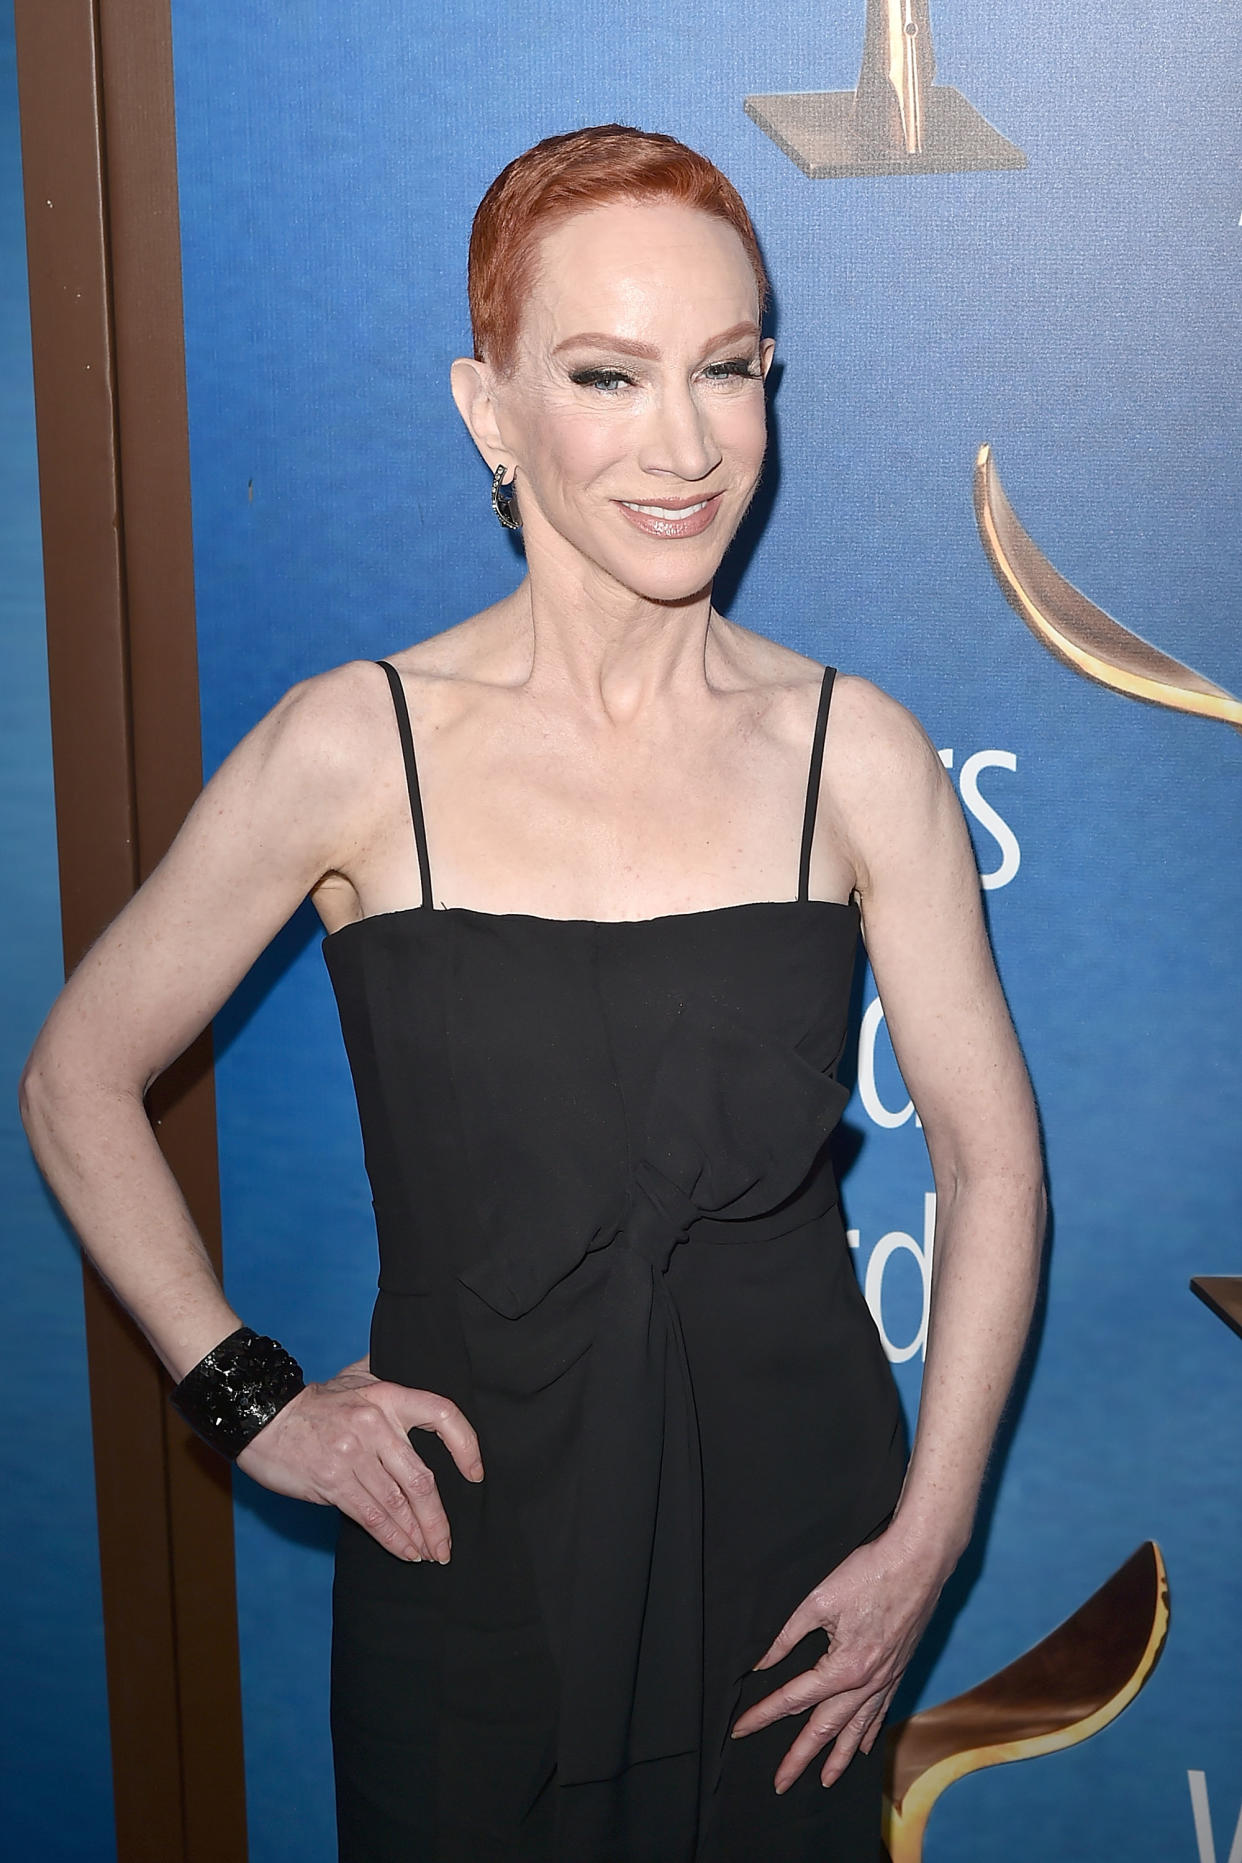 Kathy Griffin at the 2018 Writers Guild Awards in Los Angeles on Feb. 11, now says she was ahead of her time with her controversial Trump photo shoot. (Photo: David Crotty/Patrick McMullan via Getty Images)